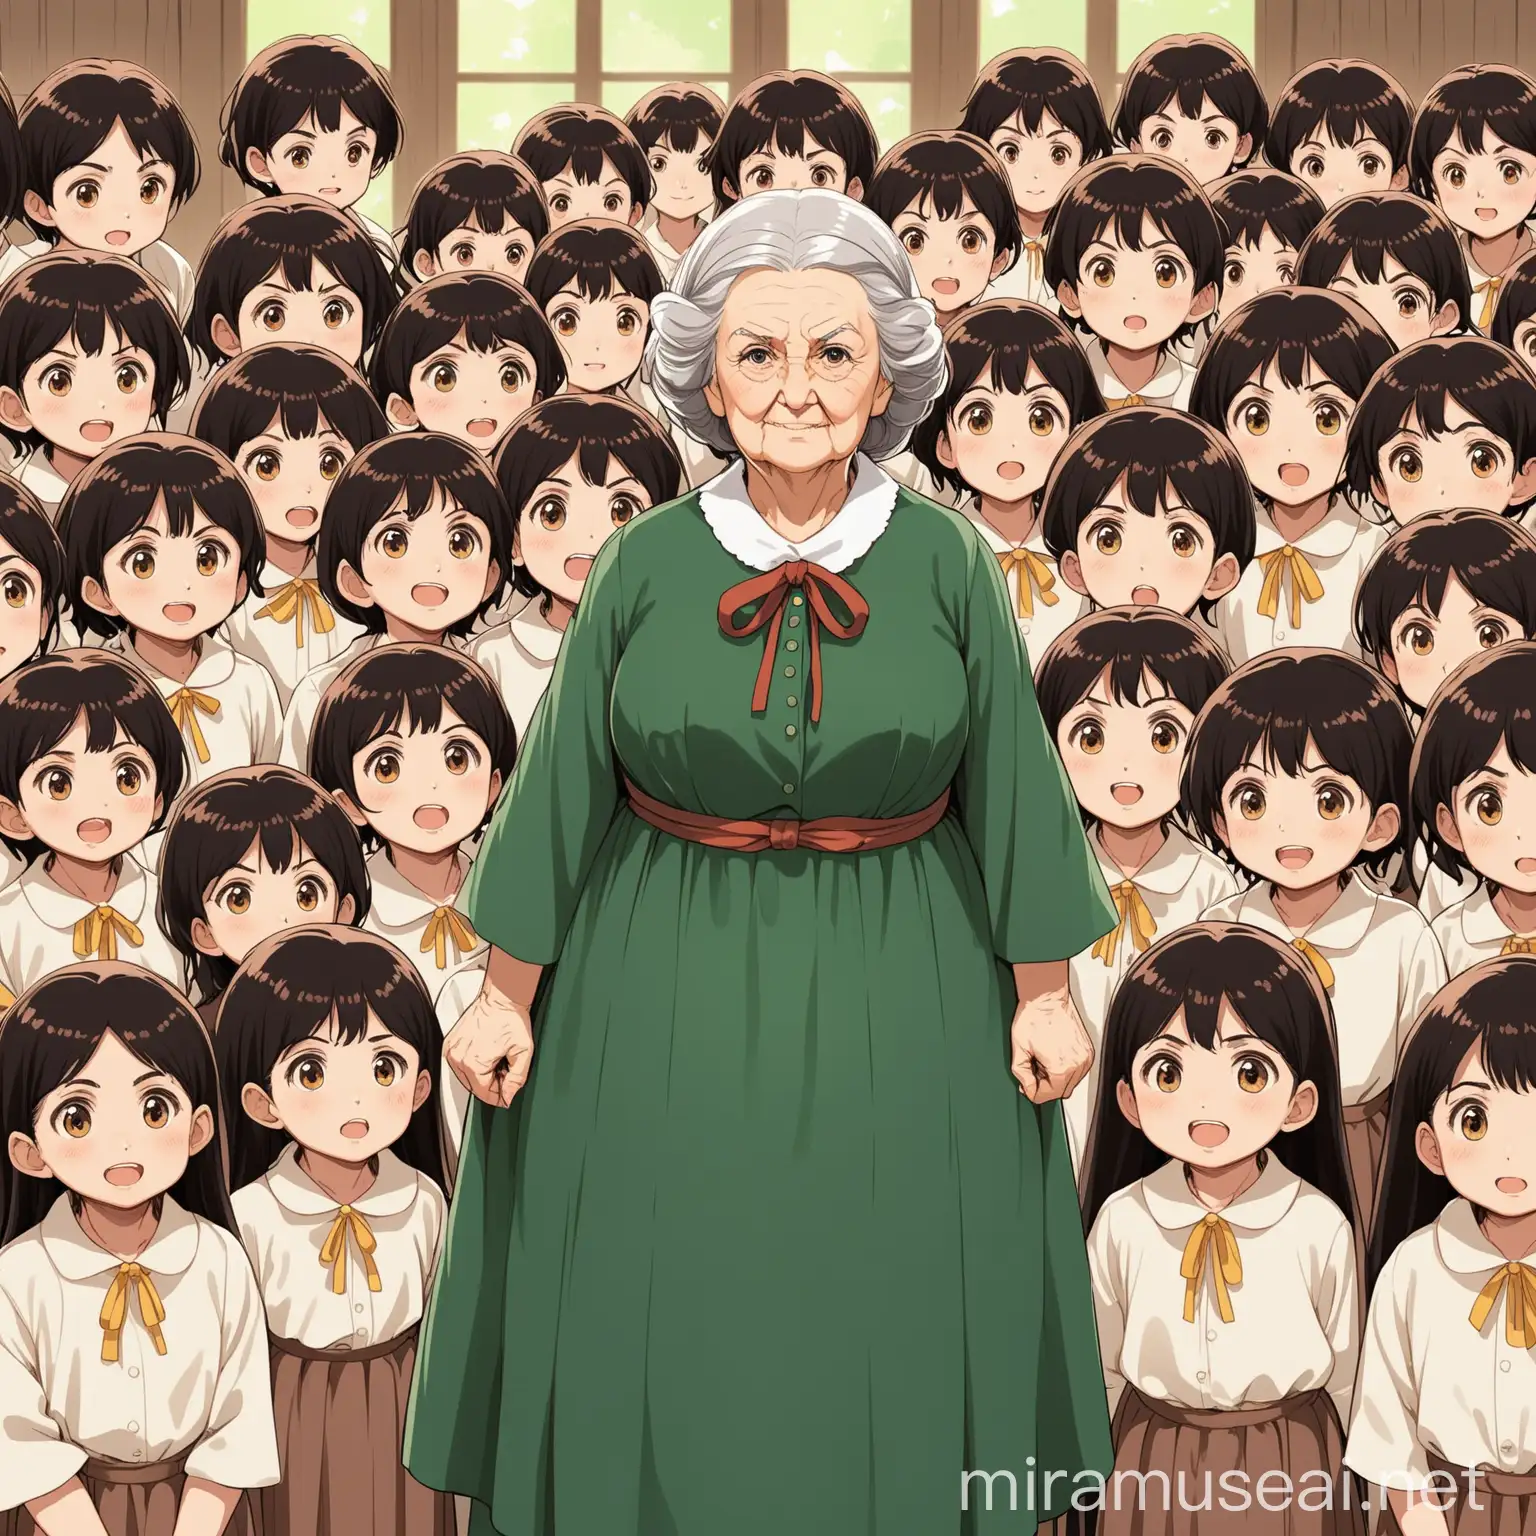 Maria Montessori Surrounded by Enthusiastic Students in Studio Ghibli Style